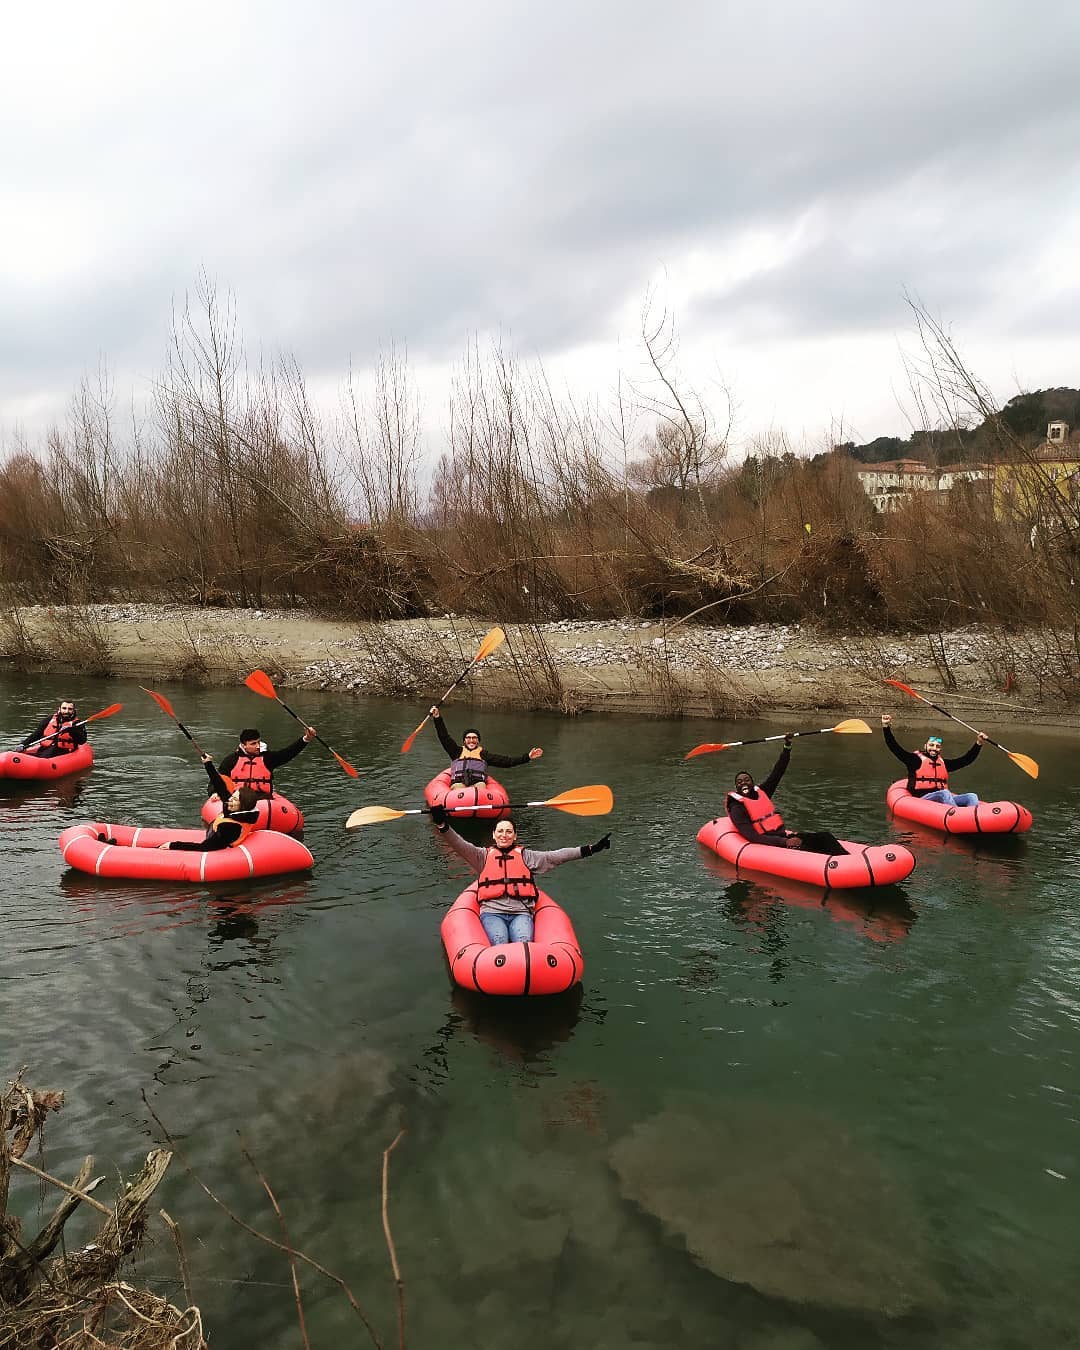 Packrafting a Lucca sul Fiume Serchio